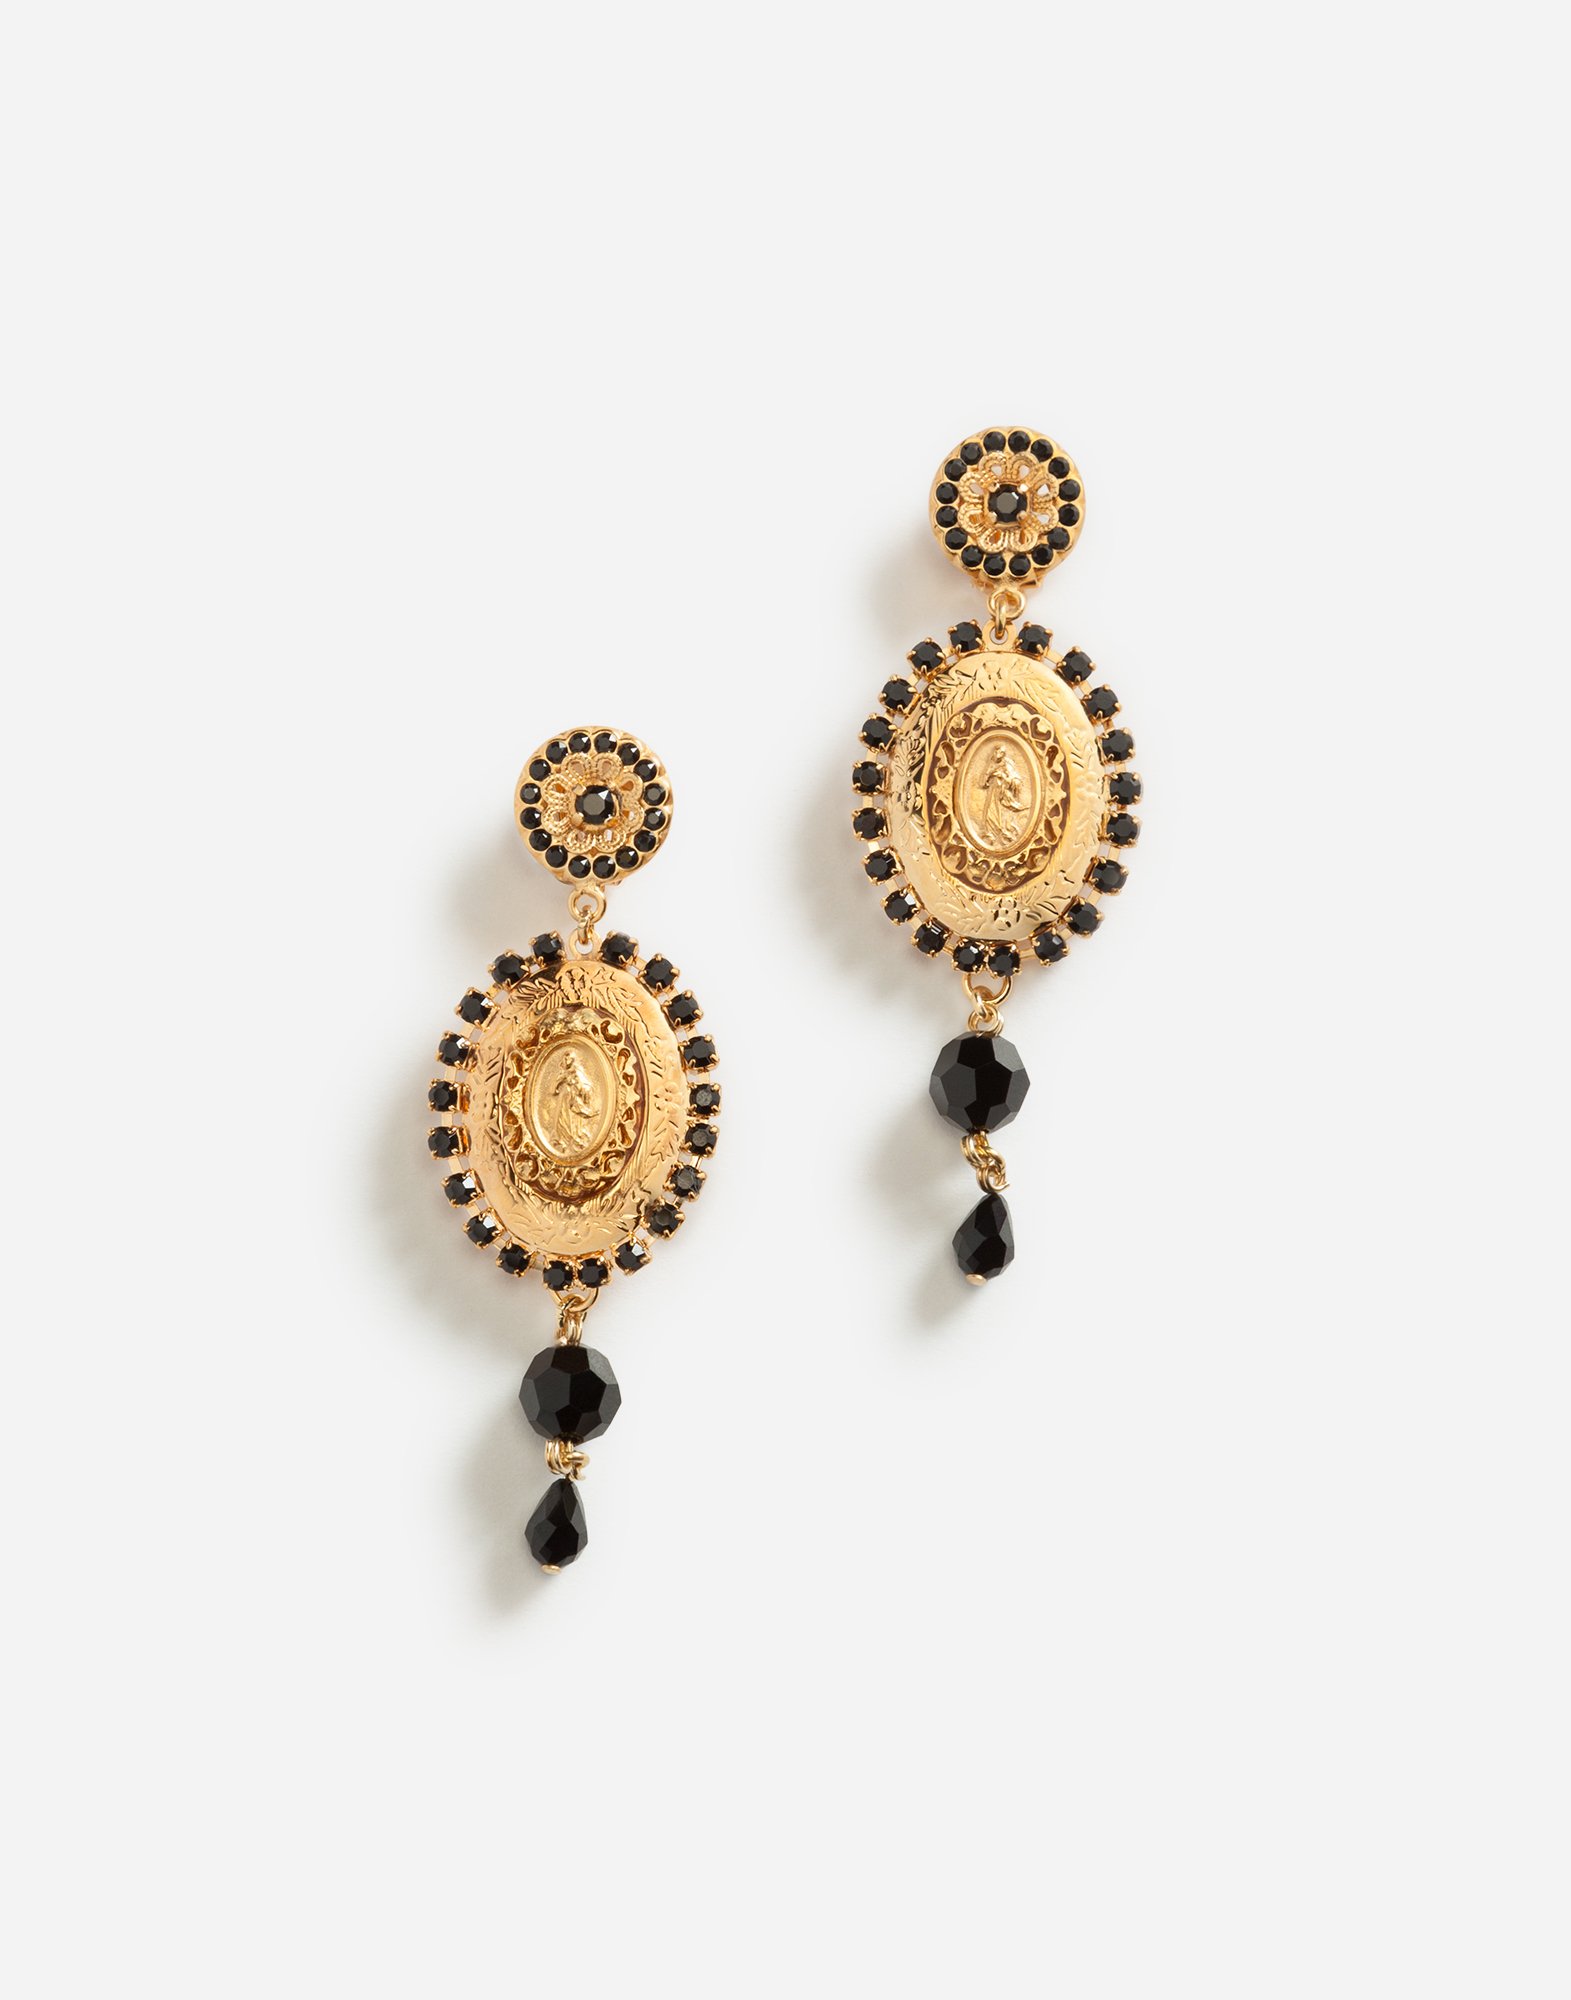 Drop earrings with decorative details in Gold